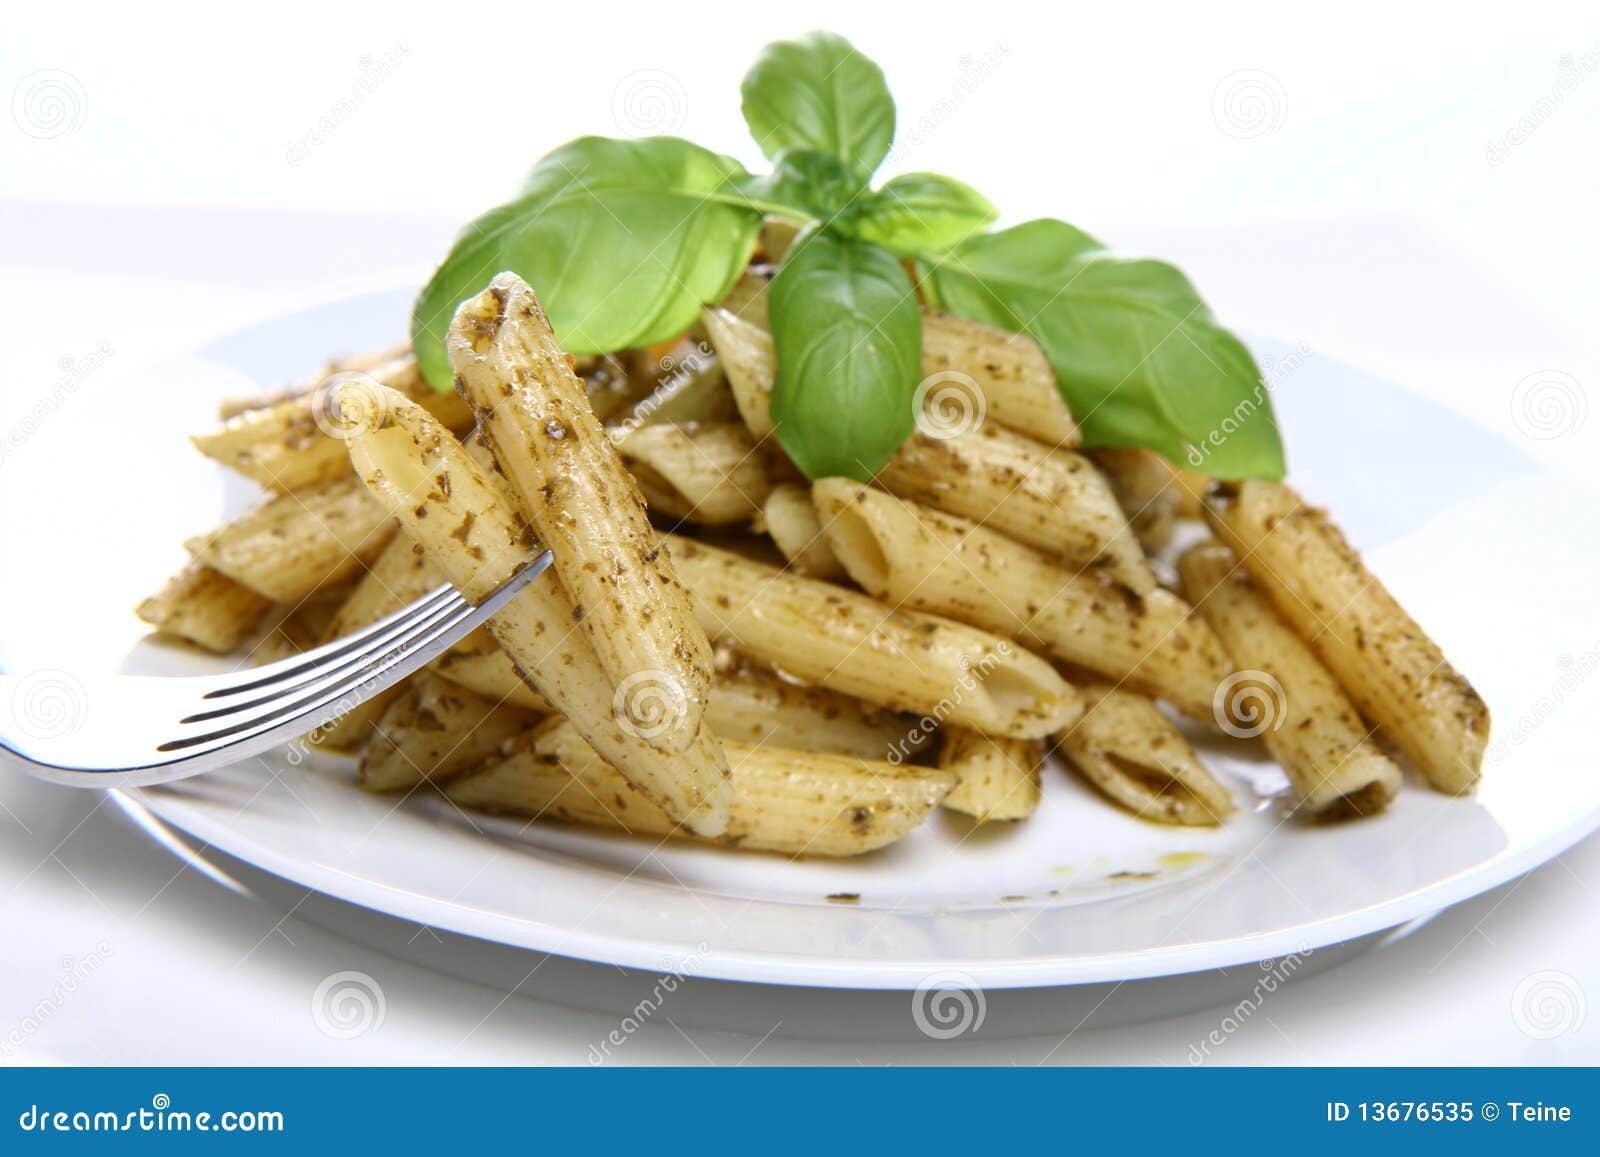 Penne with pesto stock image. Image of dinner, pasta - 13676535